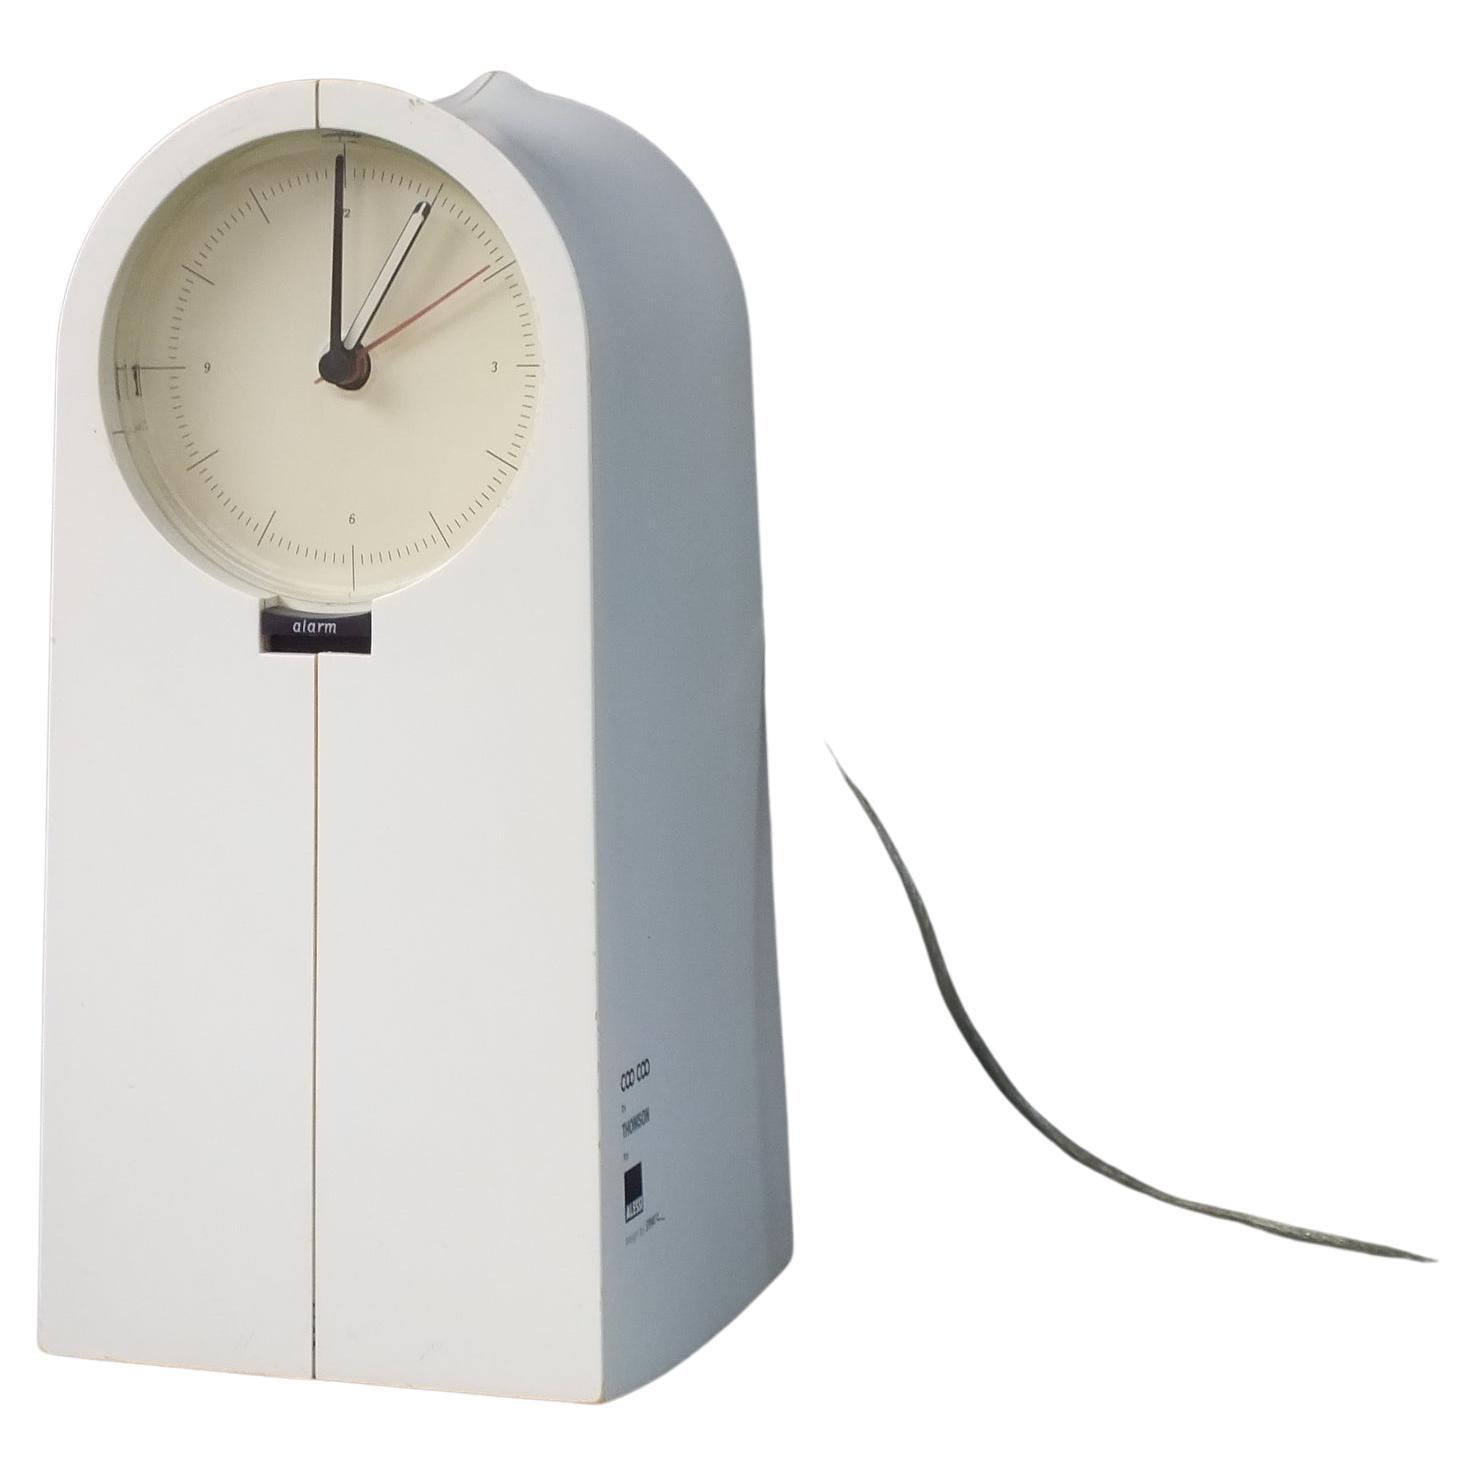 Thomson Prod. Alessi Clock Radio Coo Coo by Pilippe Starck Design Year 1994 For Sale